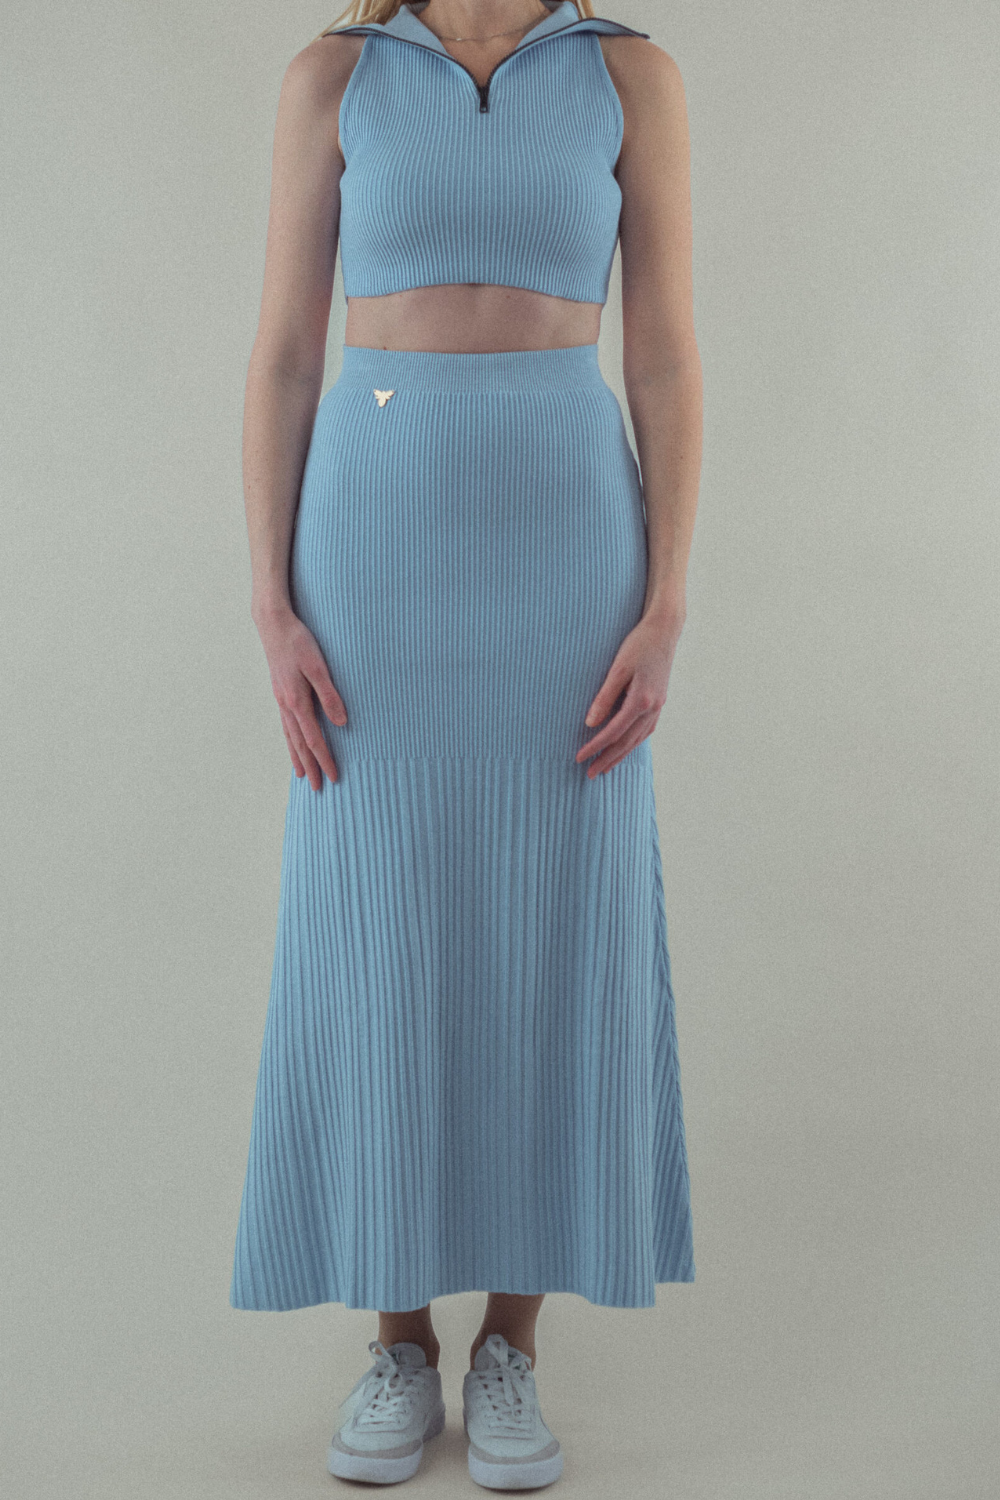 Knitted skirt, blue, (T.Mosca), UOL24-01